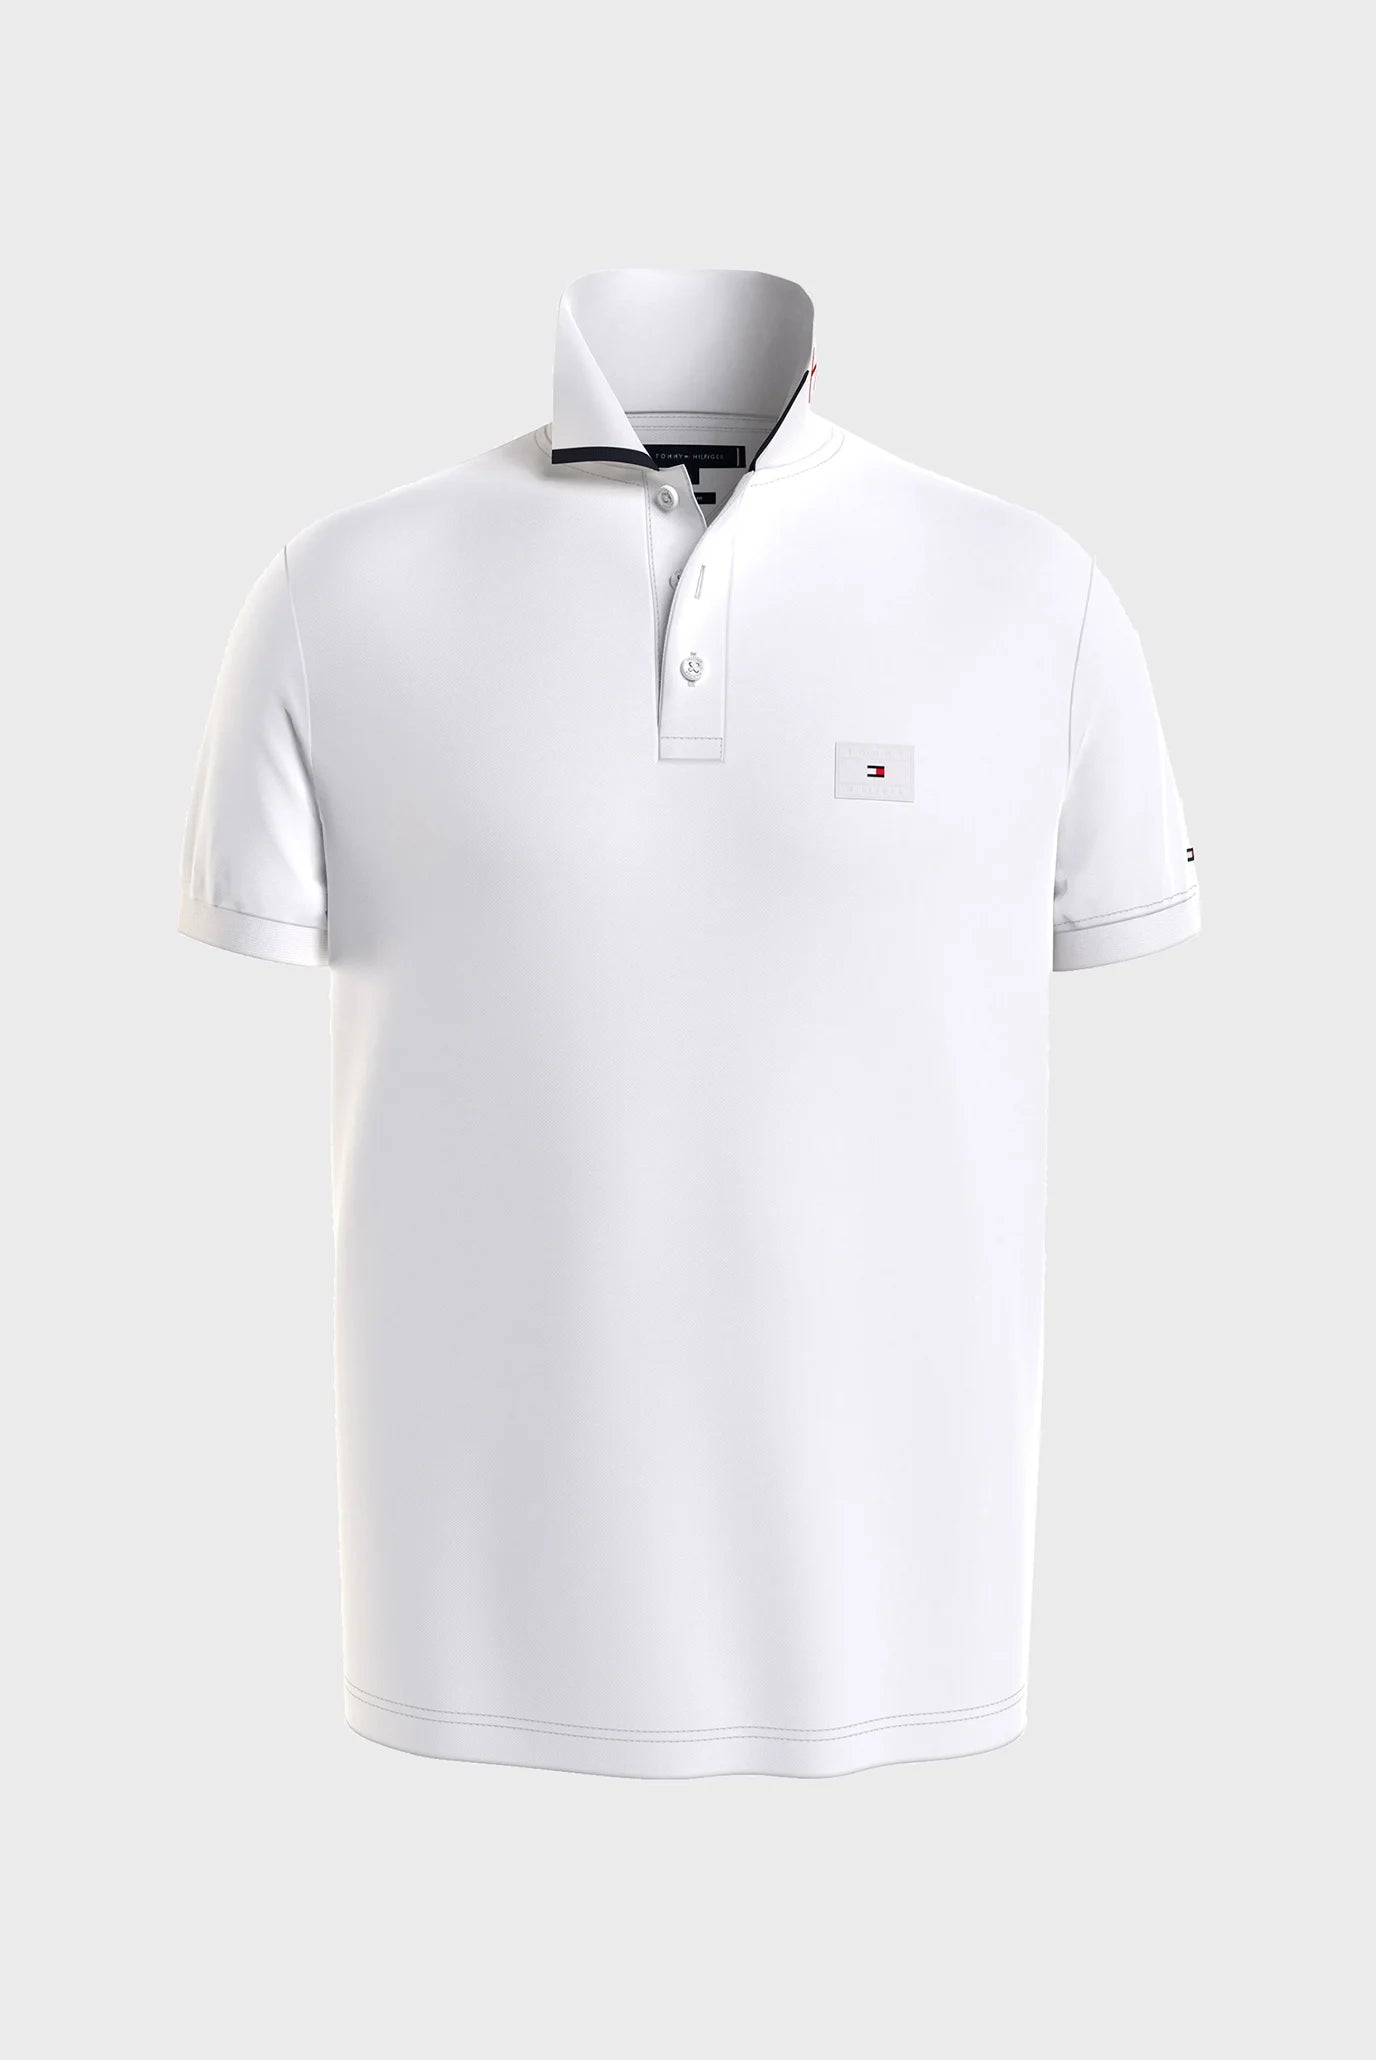 Tommy Hilfiger Pique Polo Shirt